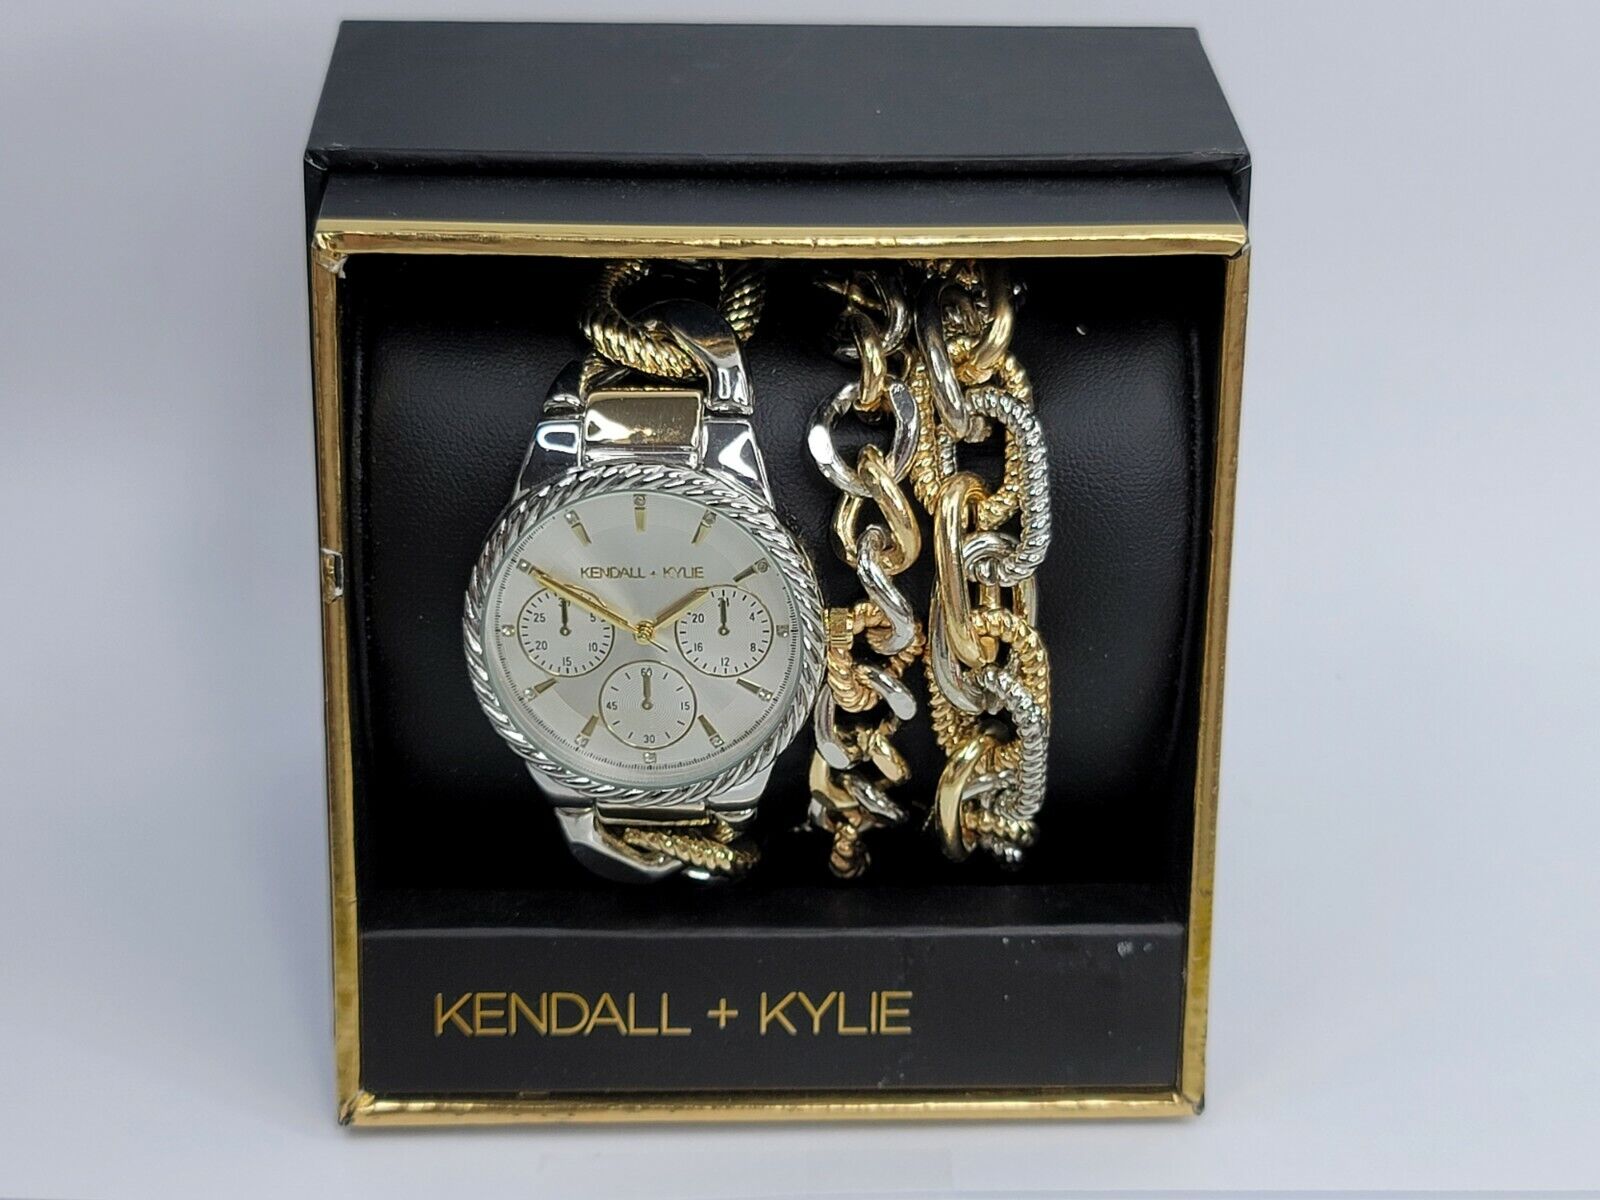 Kendall + Kylie: Dainty Silver/Gold Chain Link Watch/Layered Bracelet Set